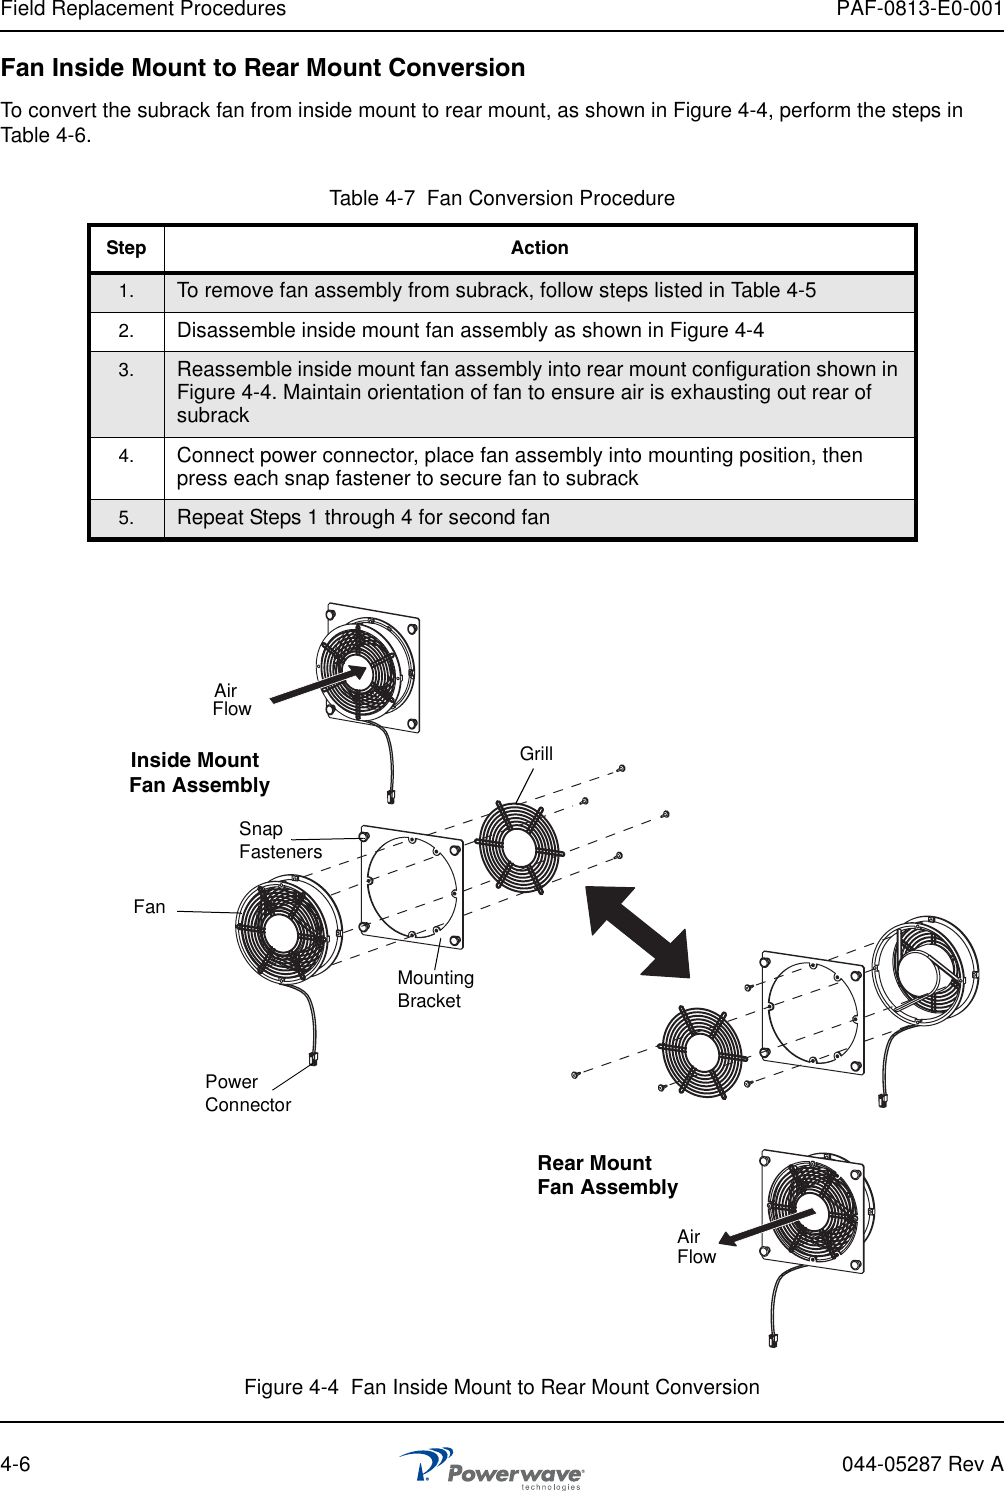 Field Replacement Procedures PAF-0813-E0-0014-6 044-05287 Rev AFan Inside Mount to Rear Mount ConversionTo convert the subrack fan from inside mount to rear mount, as shown in Figure 4-4, perform the steps in Table 4-6.Figure 4-4  Fan Inside Mount to Rear Mount ConversionTable 4-7  Fan Conversion ProcedureStep Action1. To remove fan assembly from subrack, follow steps listed in Table 4-52. Disassemble inside mount fan assembly as shown in Figure 4-43. Reassemble inside mount fan assembly into rear mount configuration shown in Figure 4-4. Maintain orientation of fan to ensure air is exhausting out rear of subrack4. Connect power connector, place fan assembly into mounting position, then press each snap fastener to secure fan to subrack5. Repeat Steps 1 through 4 for second fanMountingBracketSnapFastenersFanGrillInside MountRear MountFan AssemblyFan AssemblyPowerConnectorAirFlowAirFlow